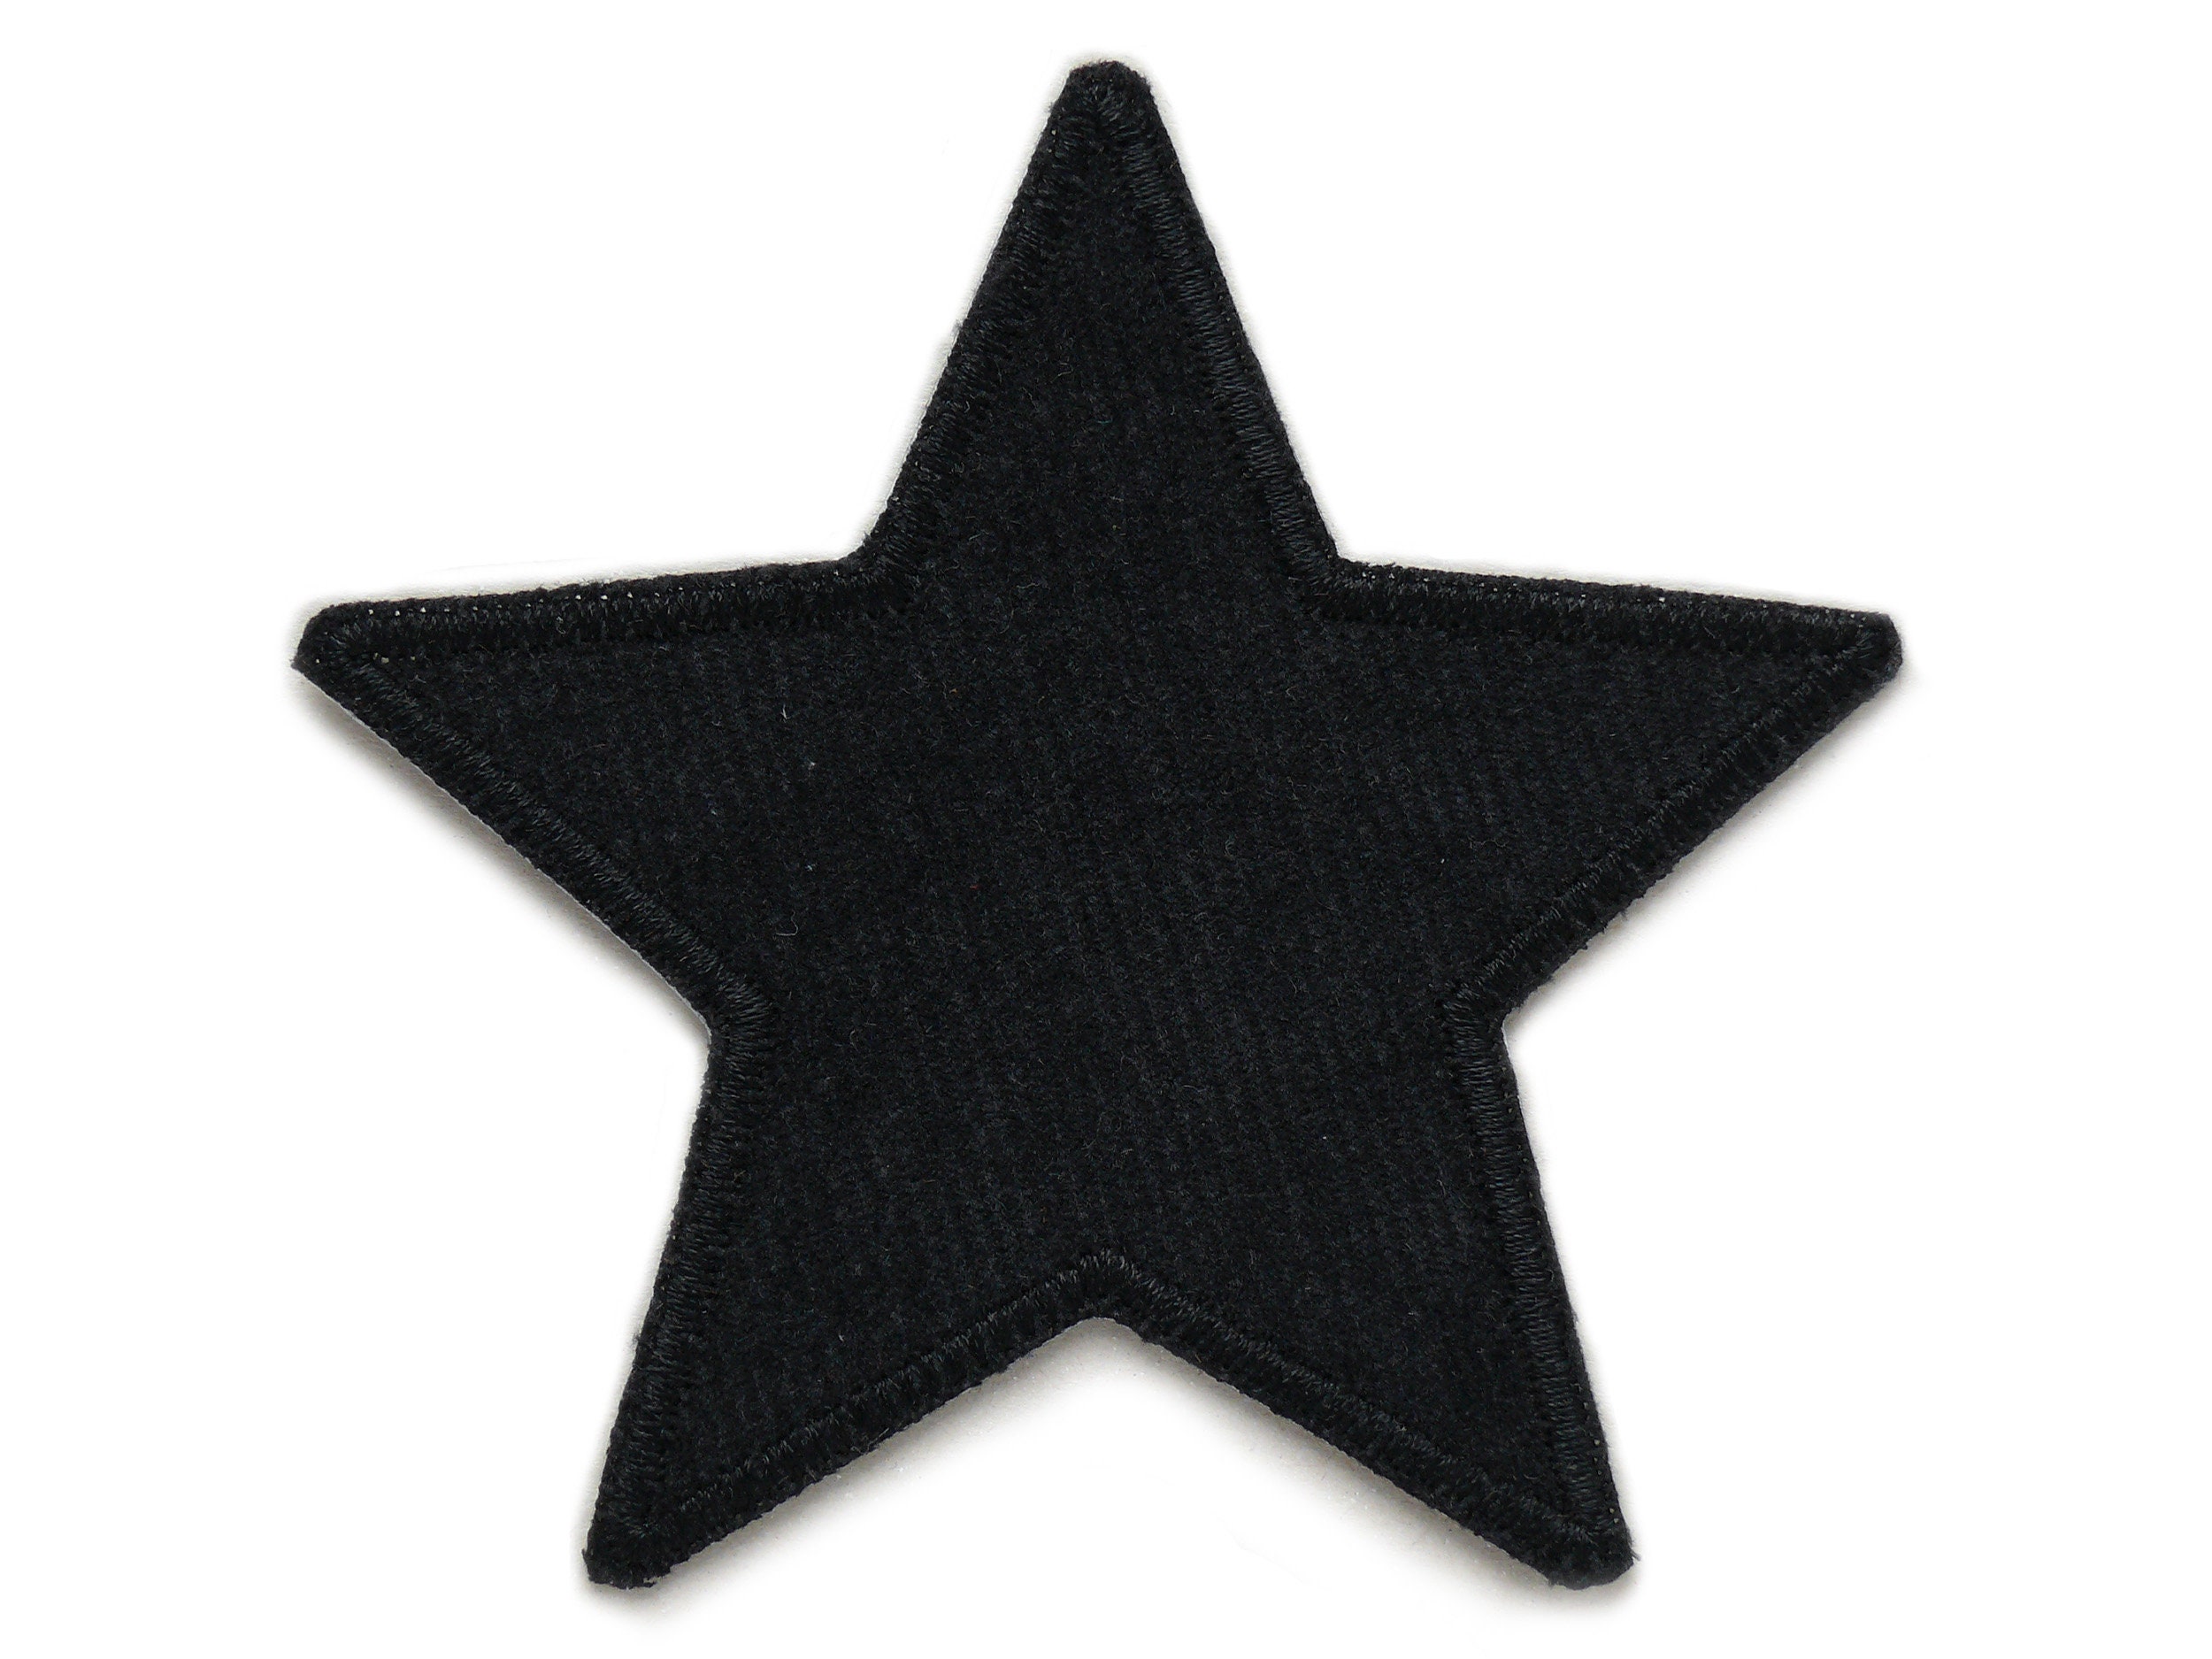 U-Sky Sew or Iron on Patches, 3pcs Five-pointed Star Pentagram Iron Patches for Clothing, Black Embroidery Patches for Backpacks, for Jeans, for